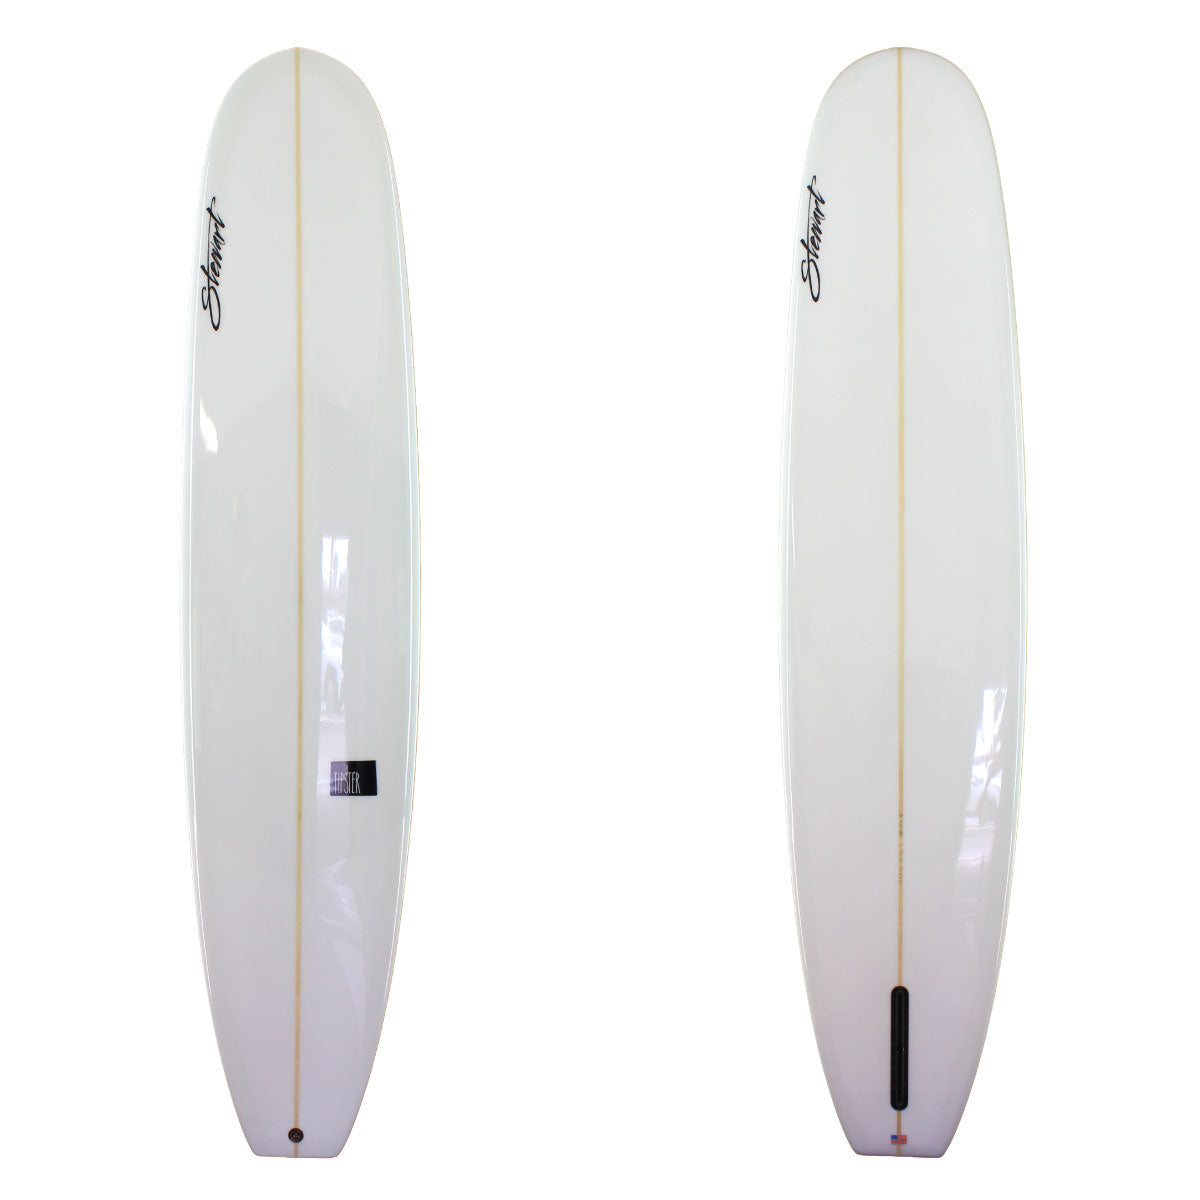 Stewart Surfboards 9'0 TIPSTER clear with gloss and polish finish